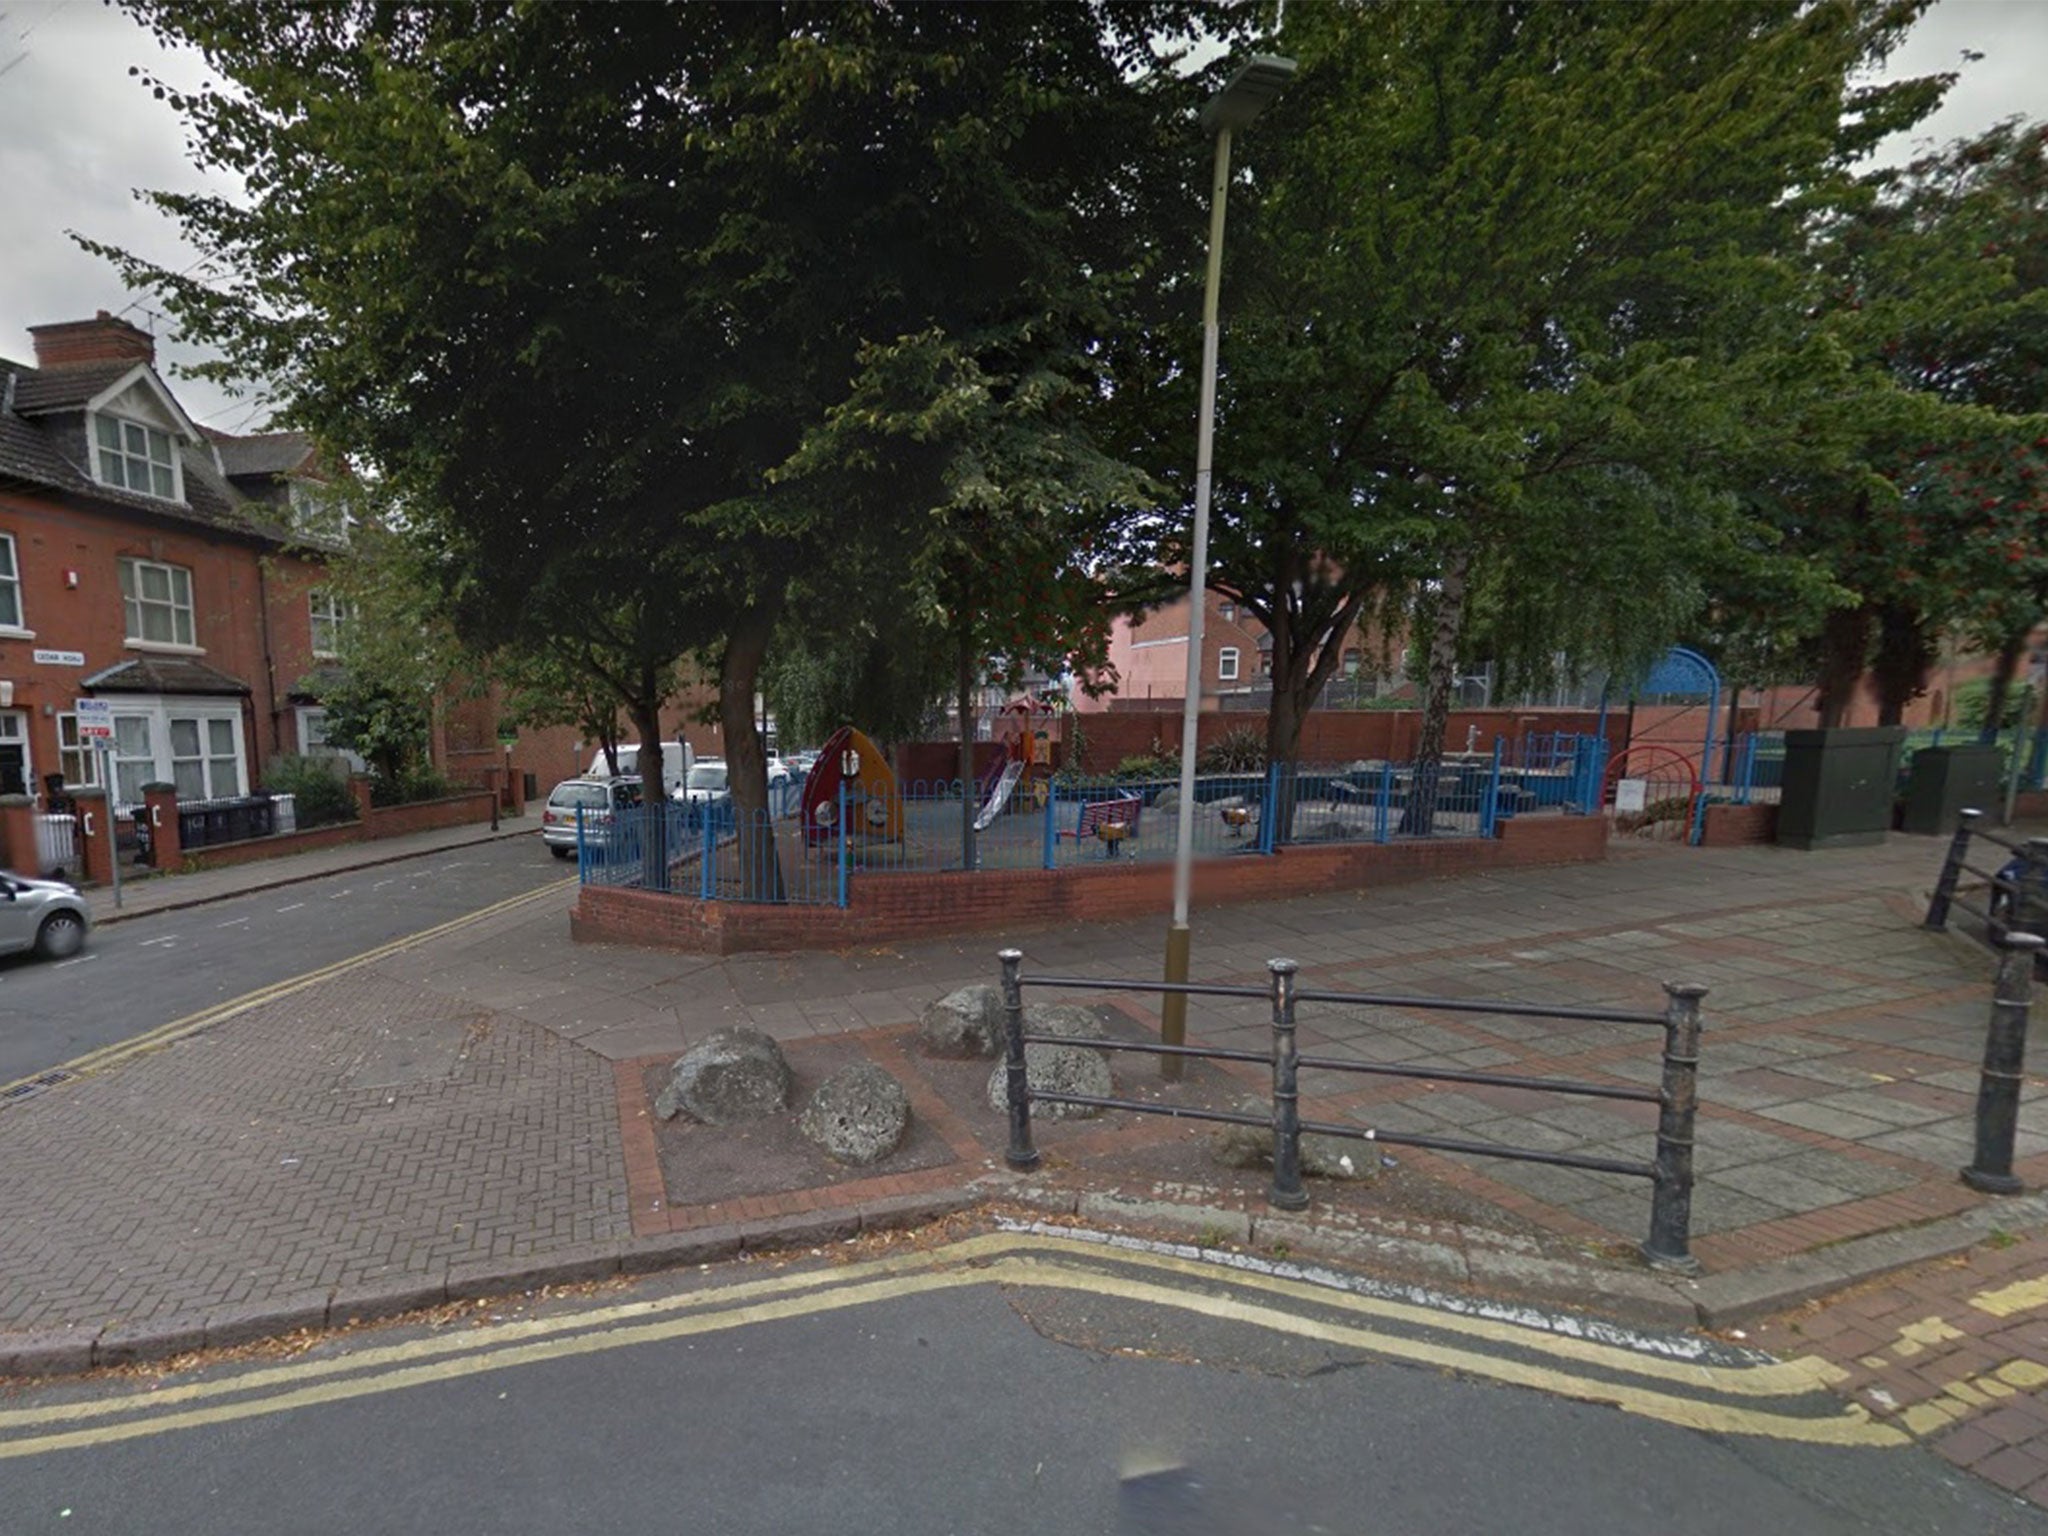 The woman was found seriously injured near a children's play area in Leicester